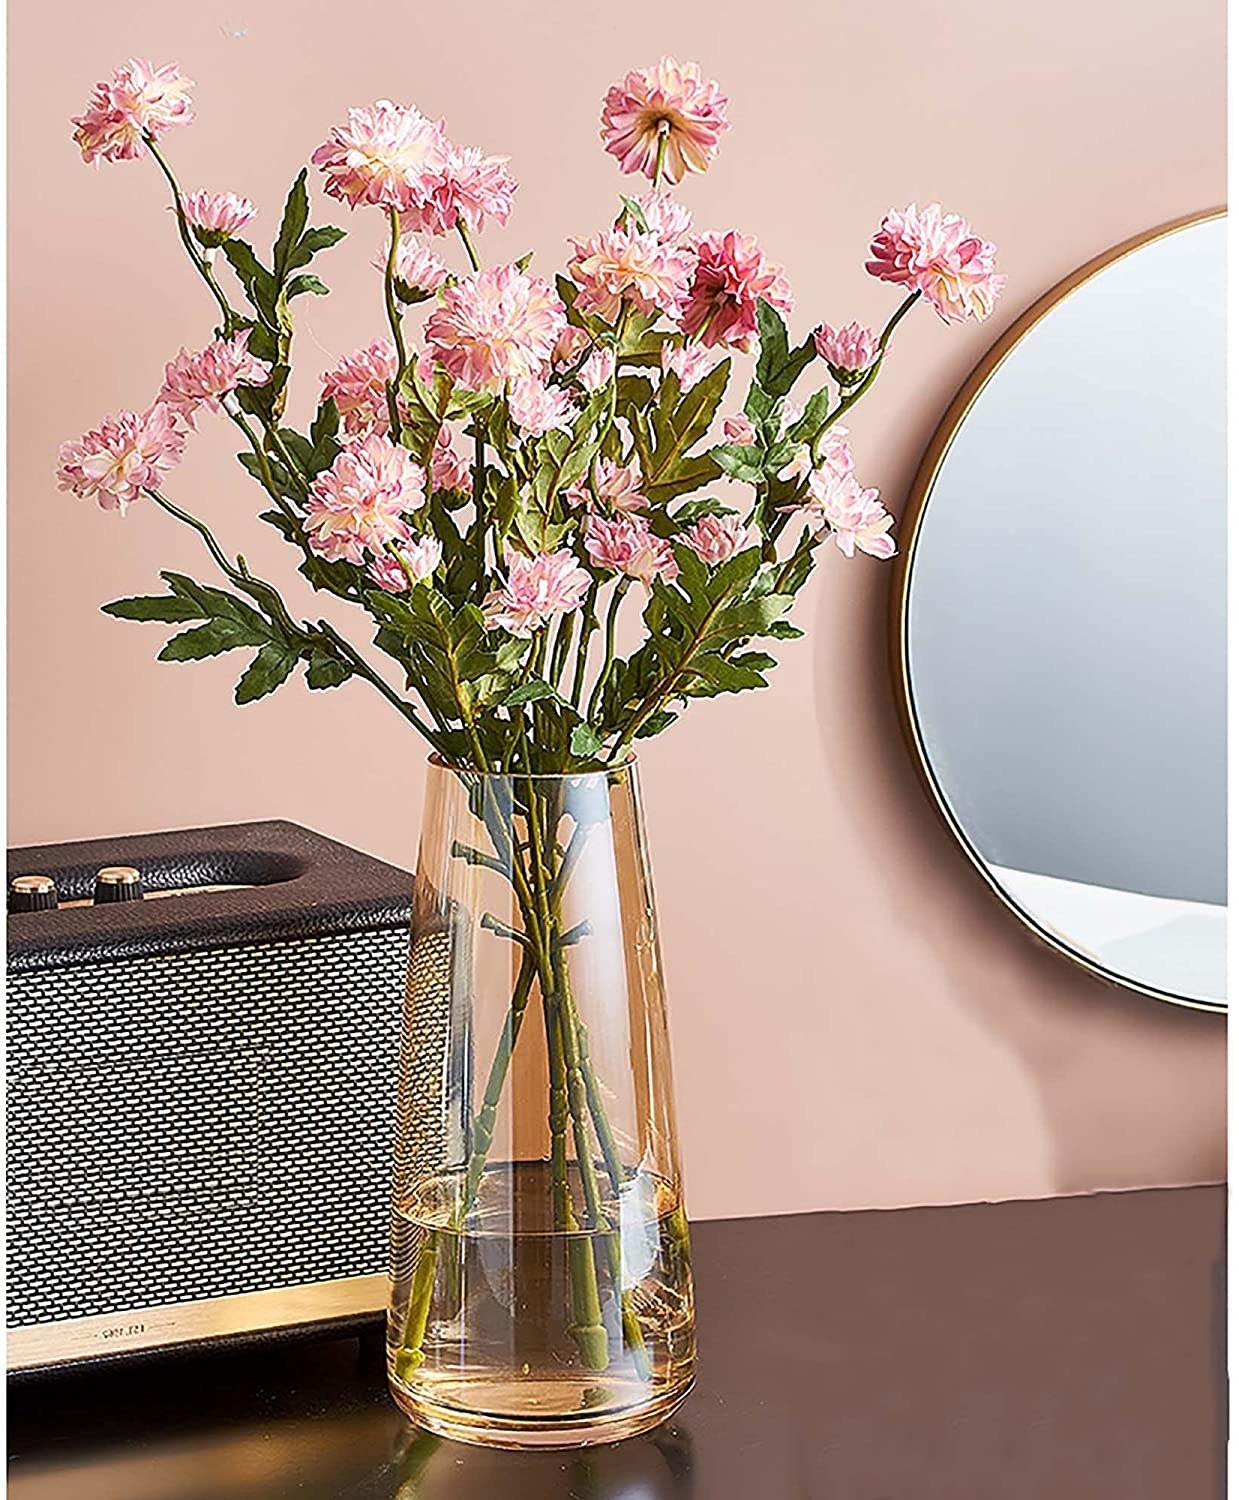 A glass vase filled with flowers sitting on a table in front of a small speaker and mirror